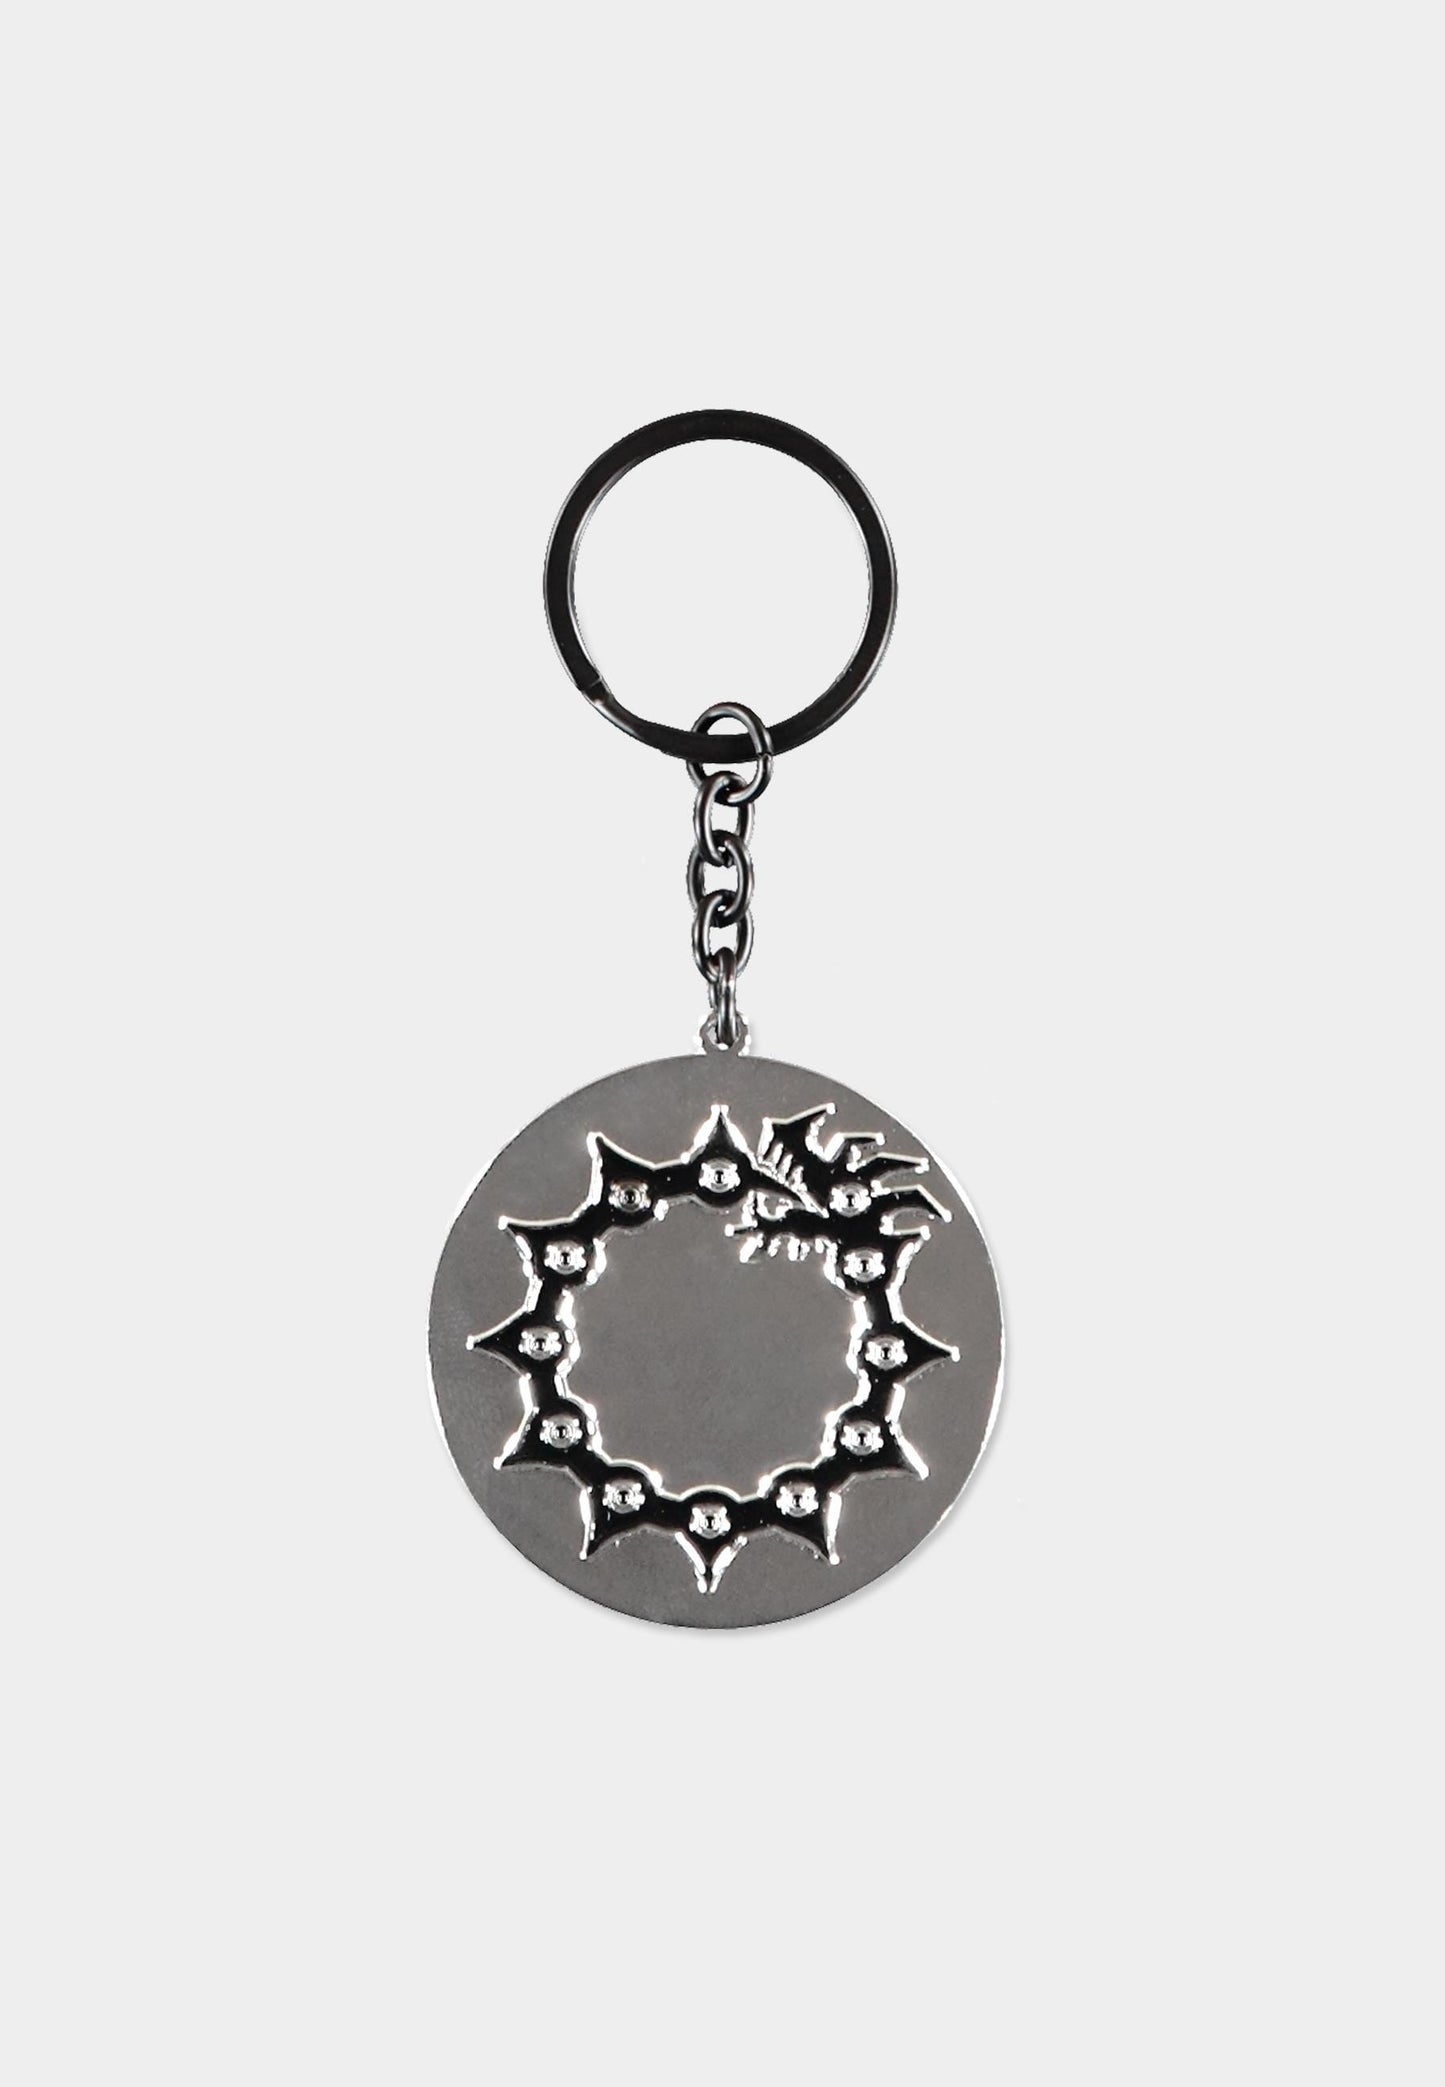 The Seven Deadly Sins - Metal Keychain